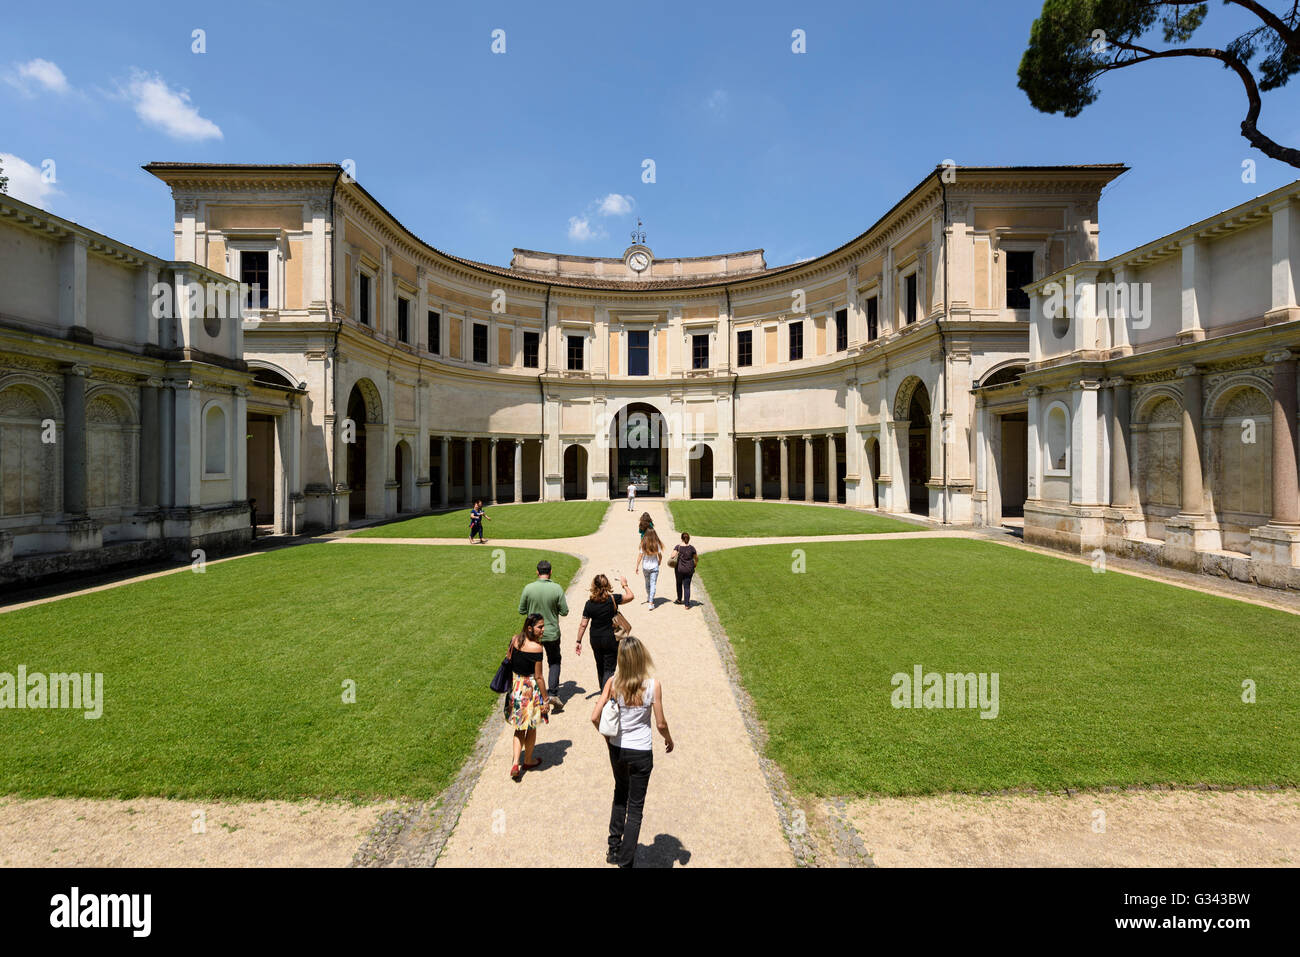 Rome. Italy. Villa Giulia, built 1551-1553, the semicircular loggia. Today the villa houses the National Etruscan Museum. Stock Photo